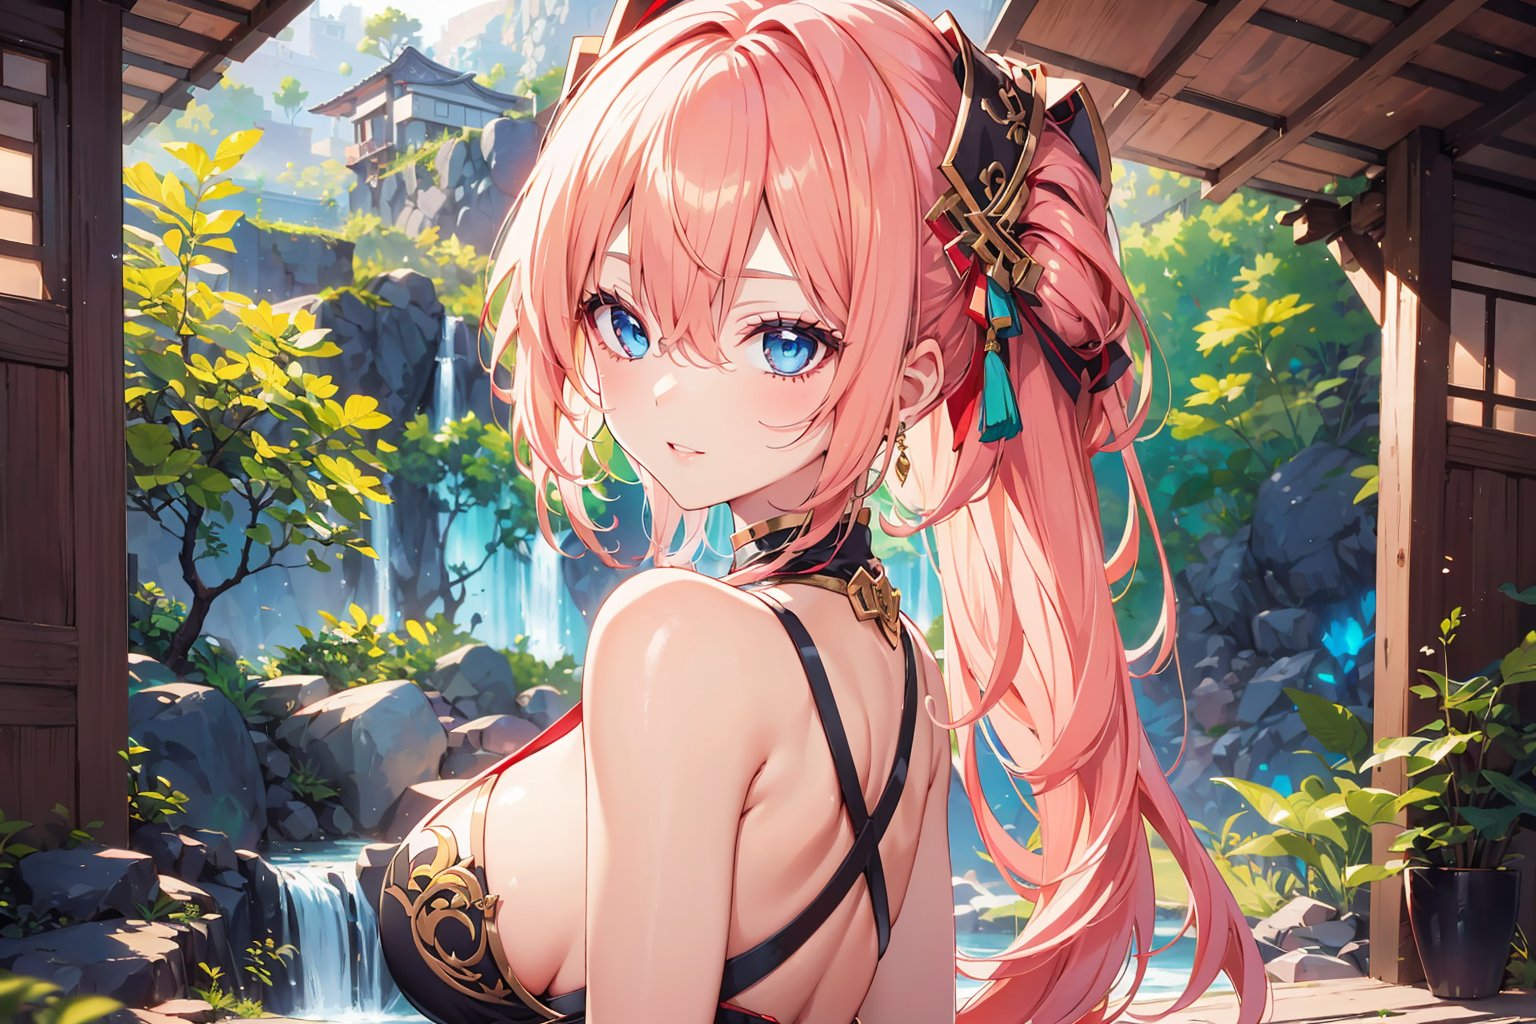 Megurine Luka posing against a serene Asian backdrop, framed by lush greenery. Soft, golden lighting highlights her porcelain skin and striking features: vibrant pink locks cascading down her back like a waterfall, piercing blue eyes shining bright, and bold red lips curved into a subtle smile. The composition focuses on her captivating face, with the natural surroundings subtly blending in the background to accentuate her beauty.